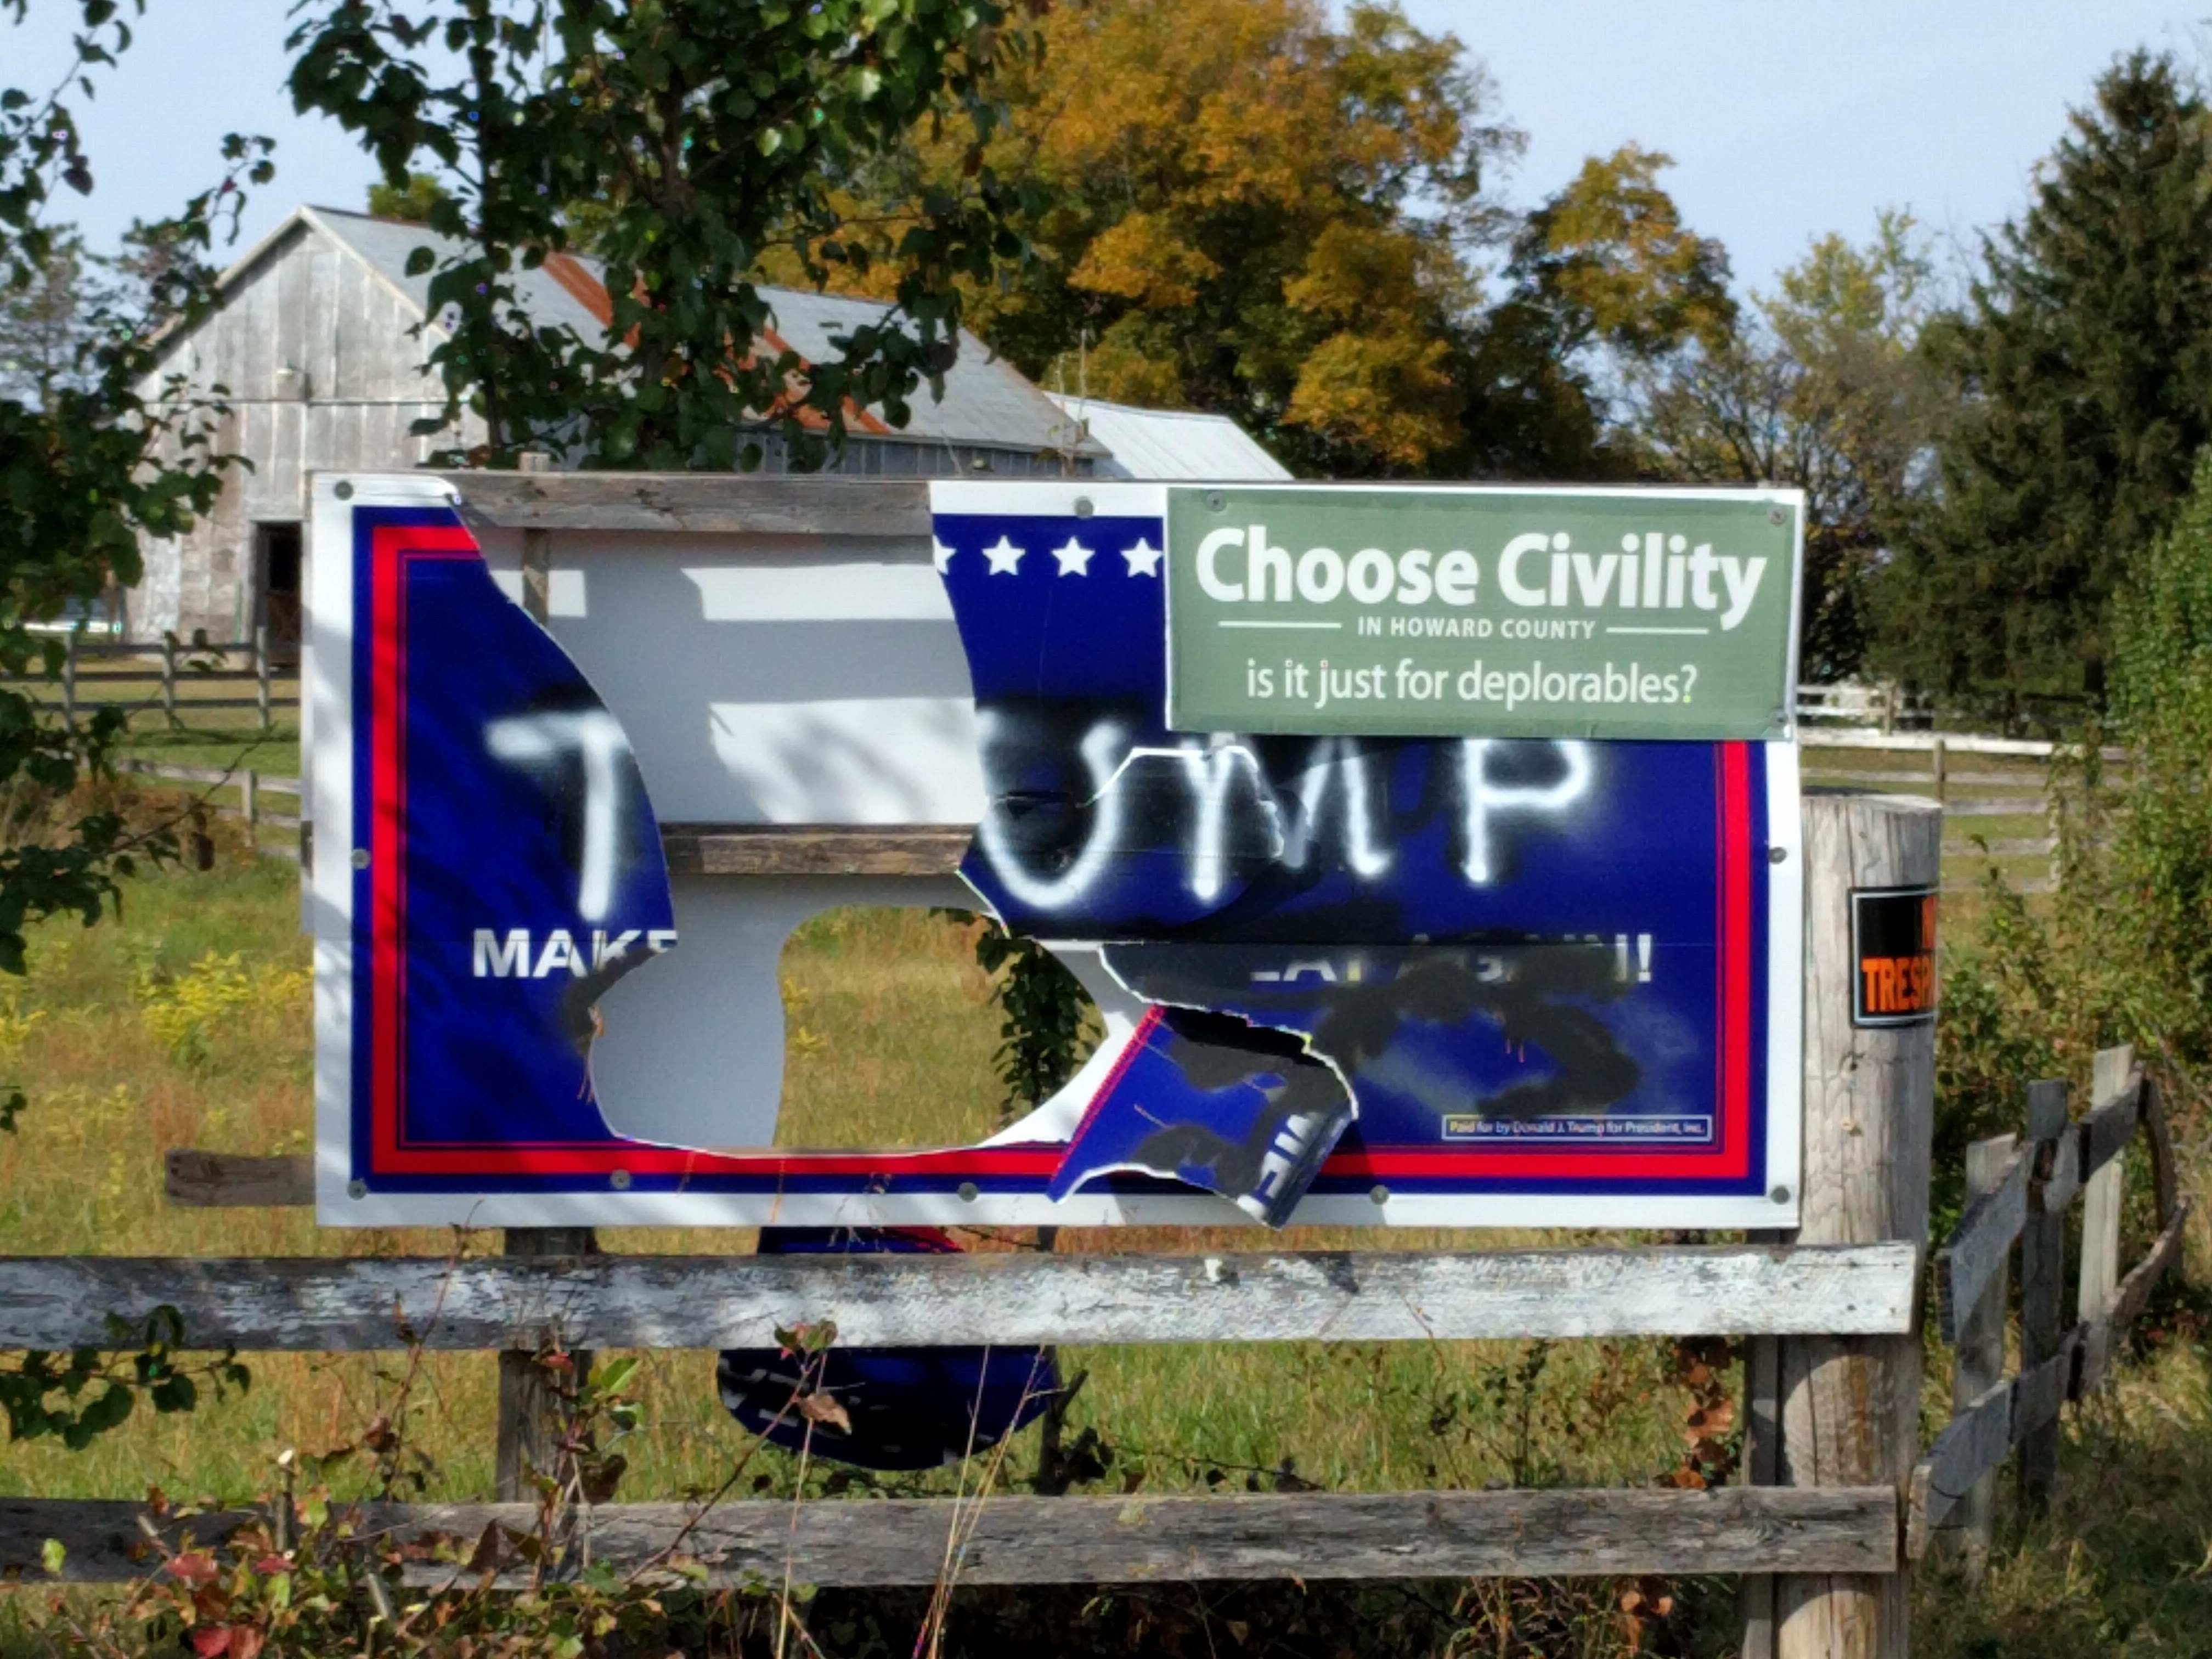 Defaced Trump sign and "Choose Civility" sticker